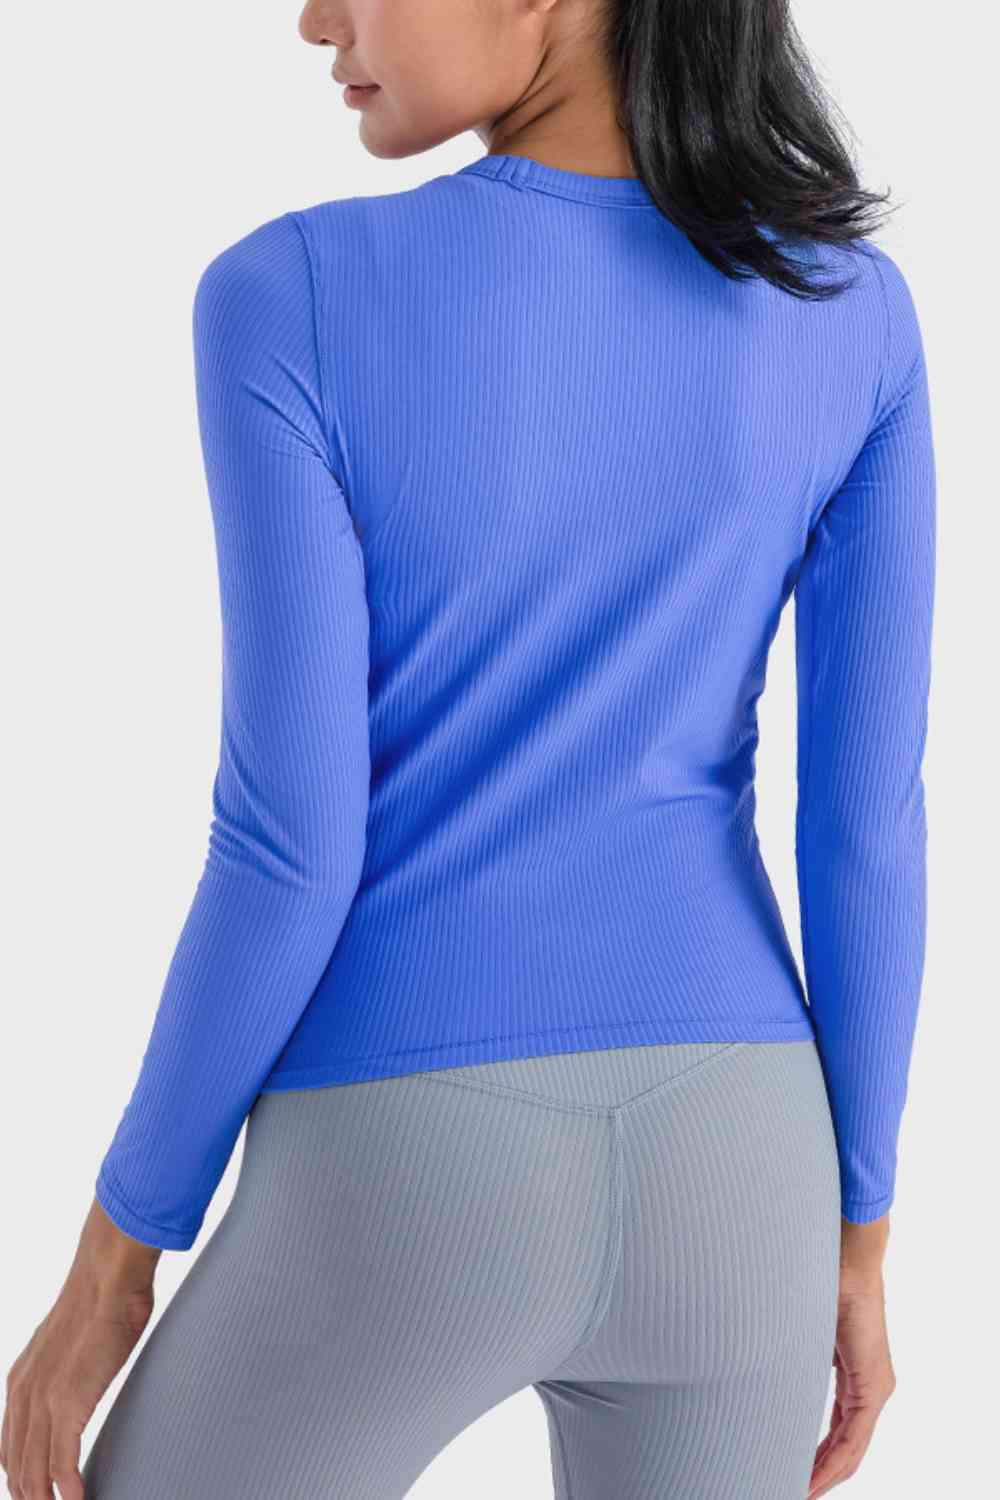 Round Neck Long Sleeve Sports Top - Groove Rabbit